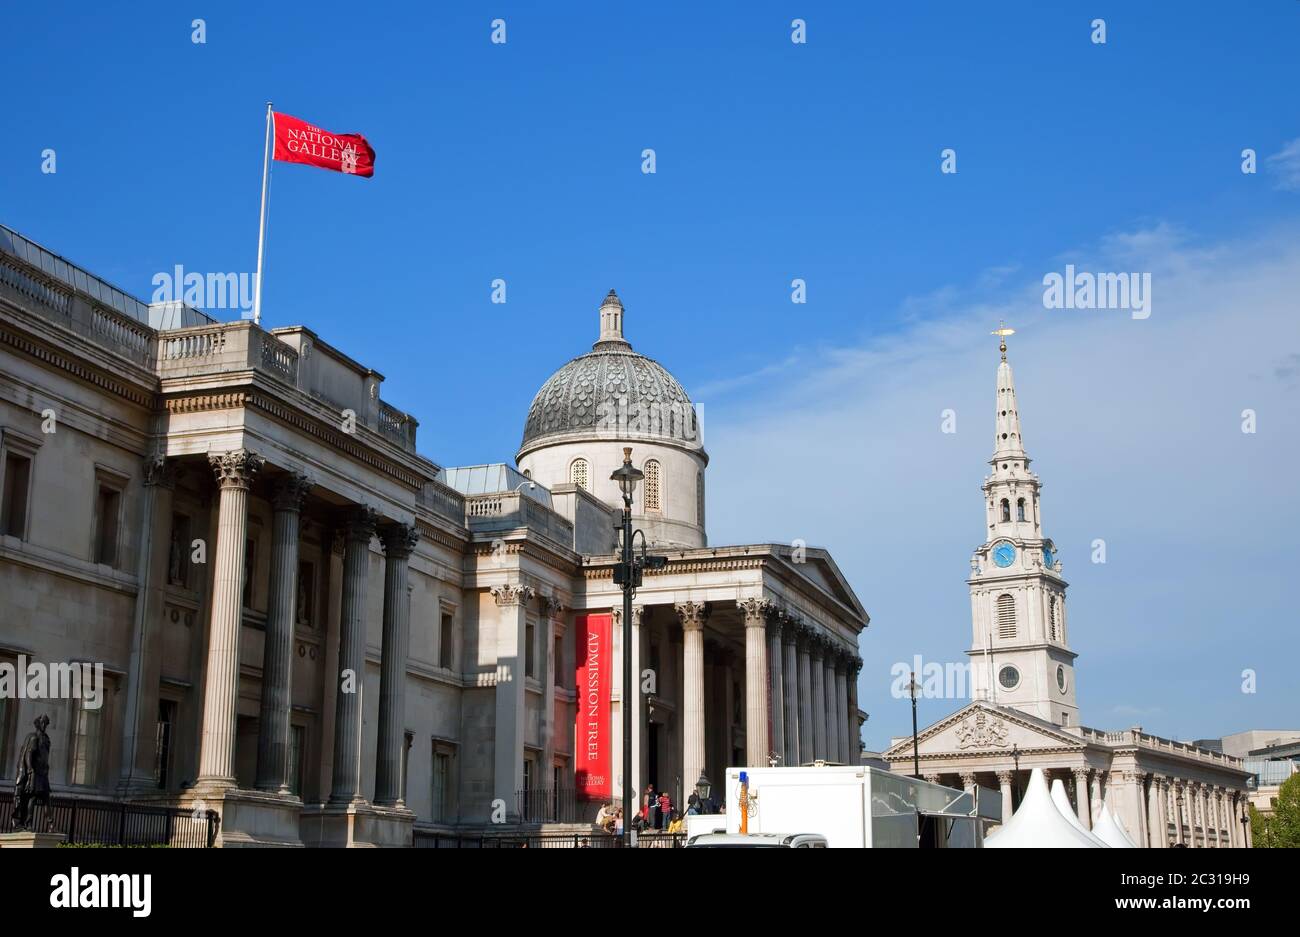 National Gallery, London Stock Photo